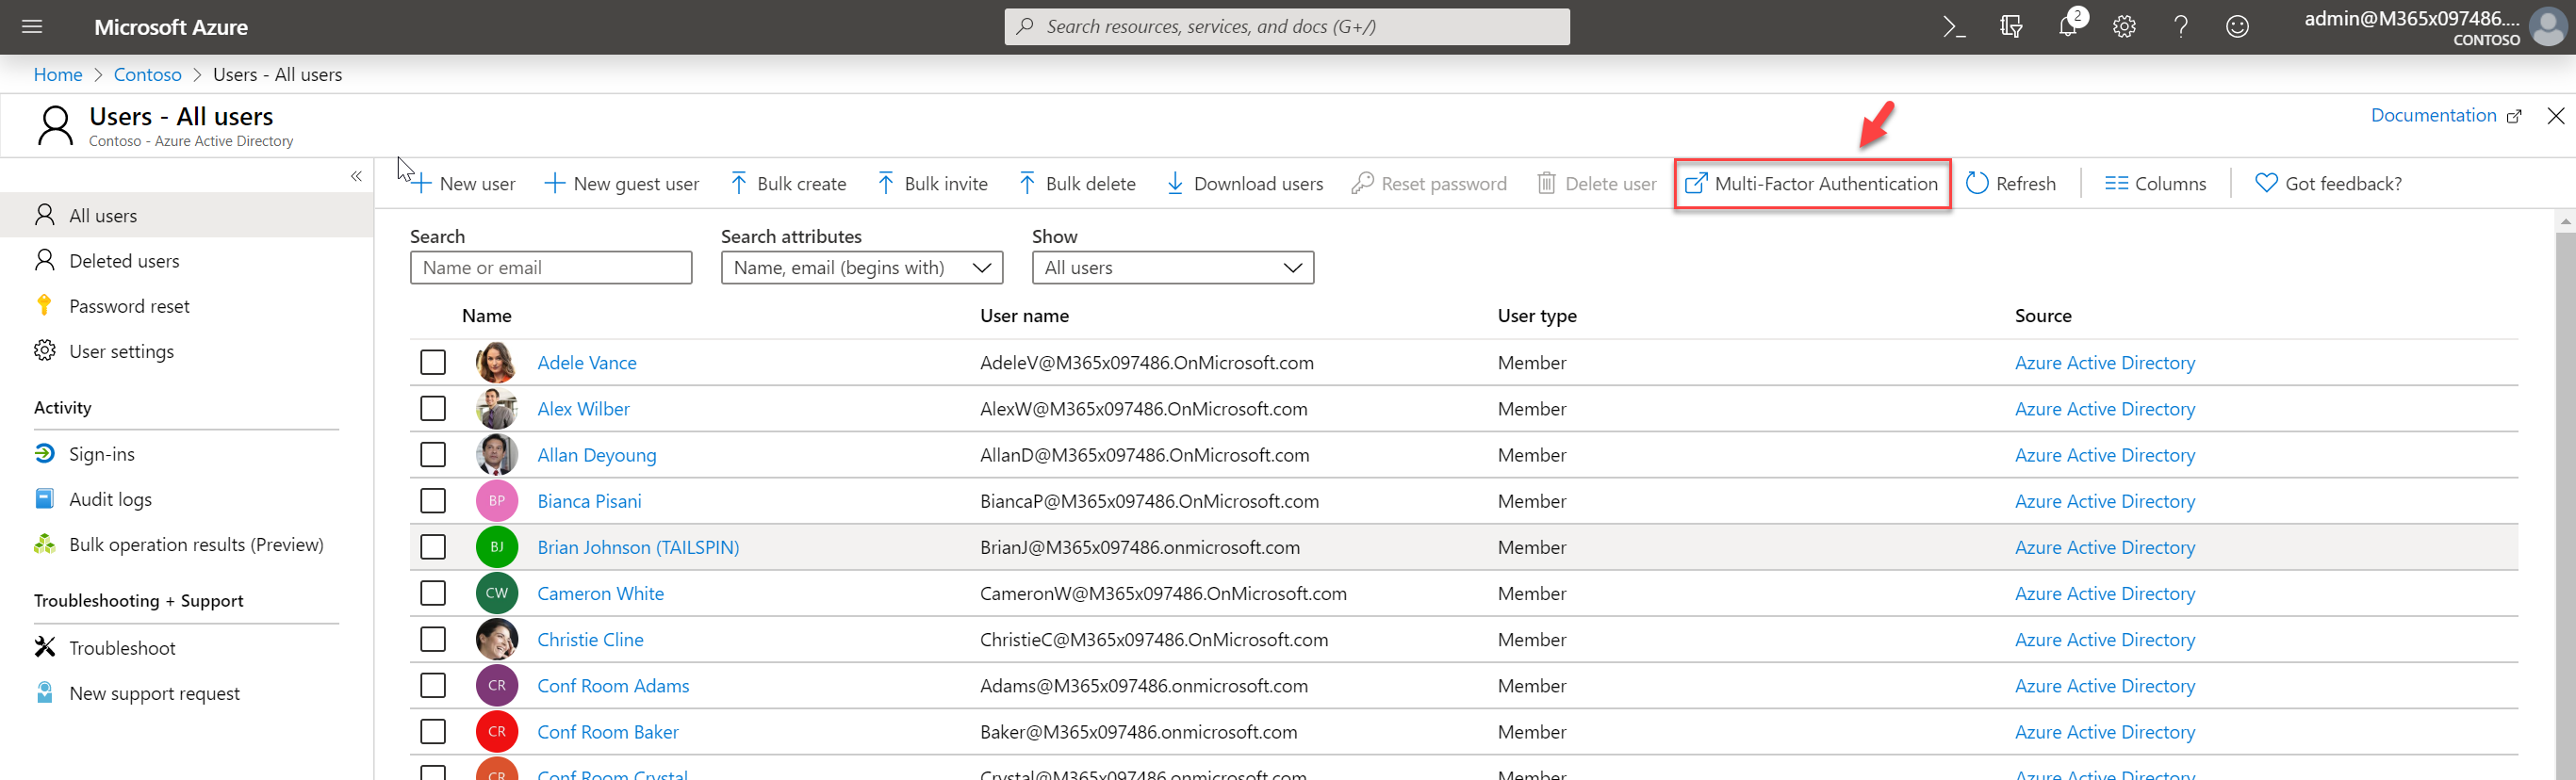 Step-by-Step Guide: How to enable MFA for Azure admins (Preview)? -  Technical Blog | REBELADMIN